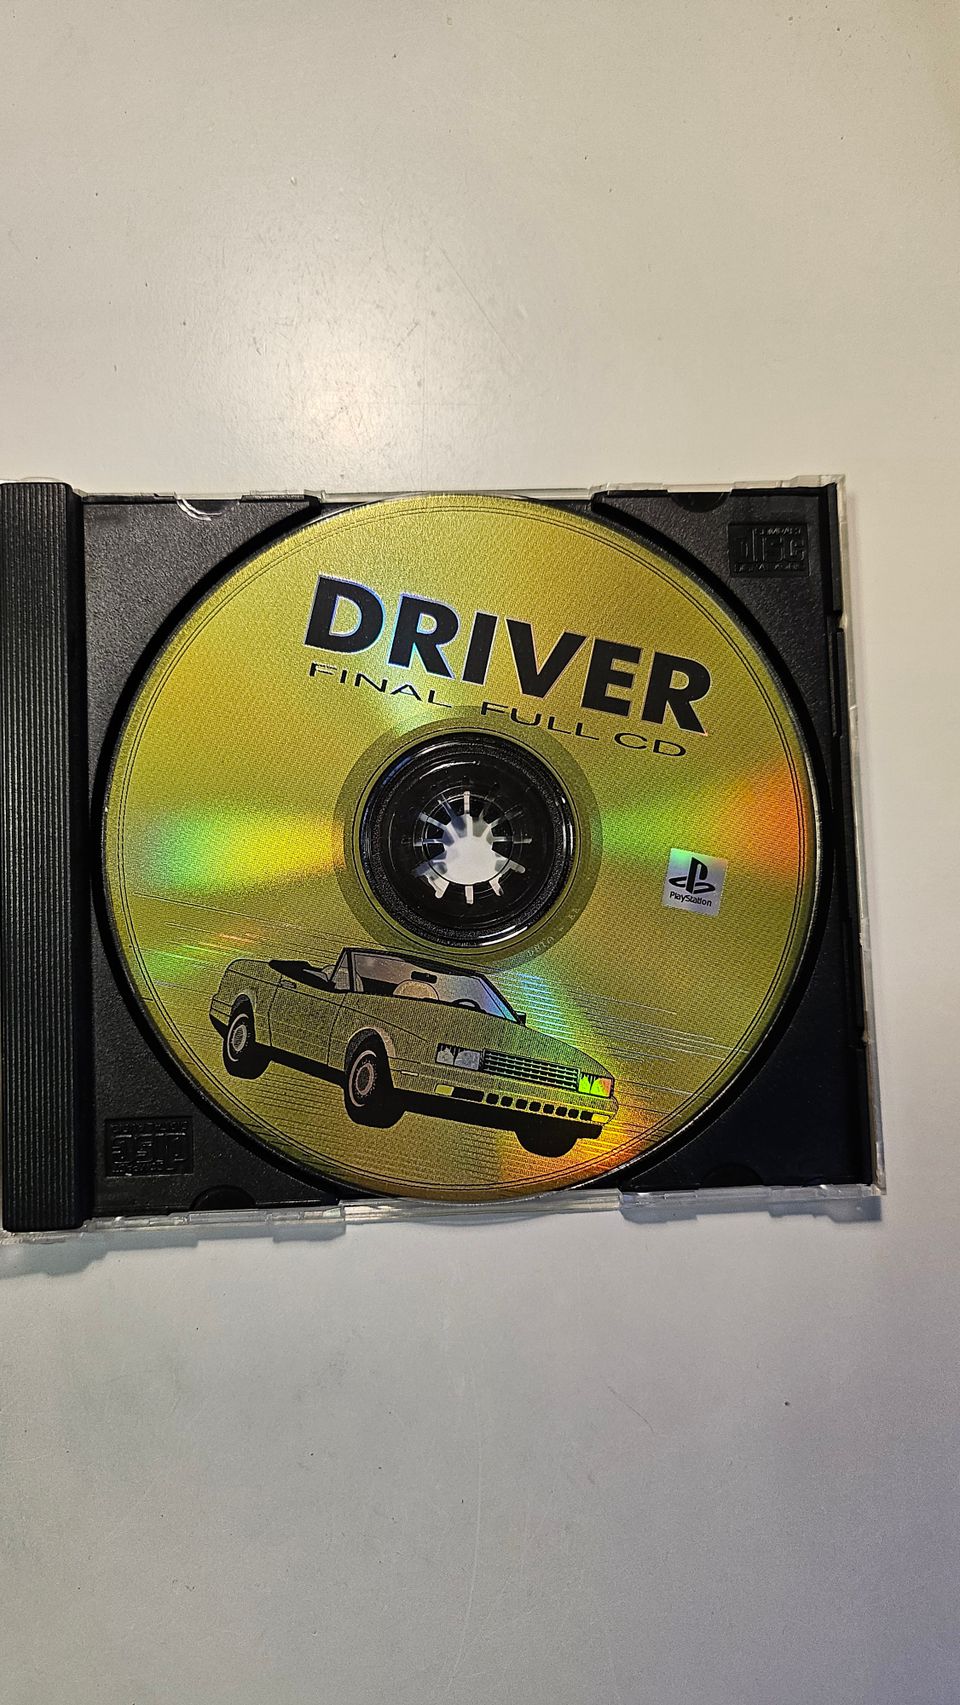 DRIVER FULL VERSION FINAL PS1